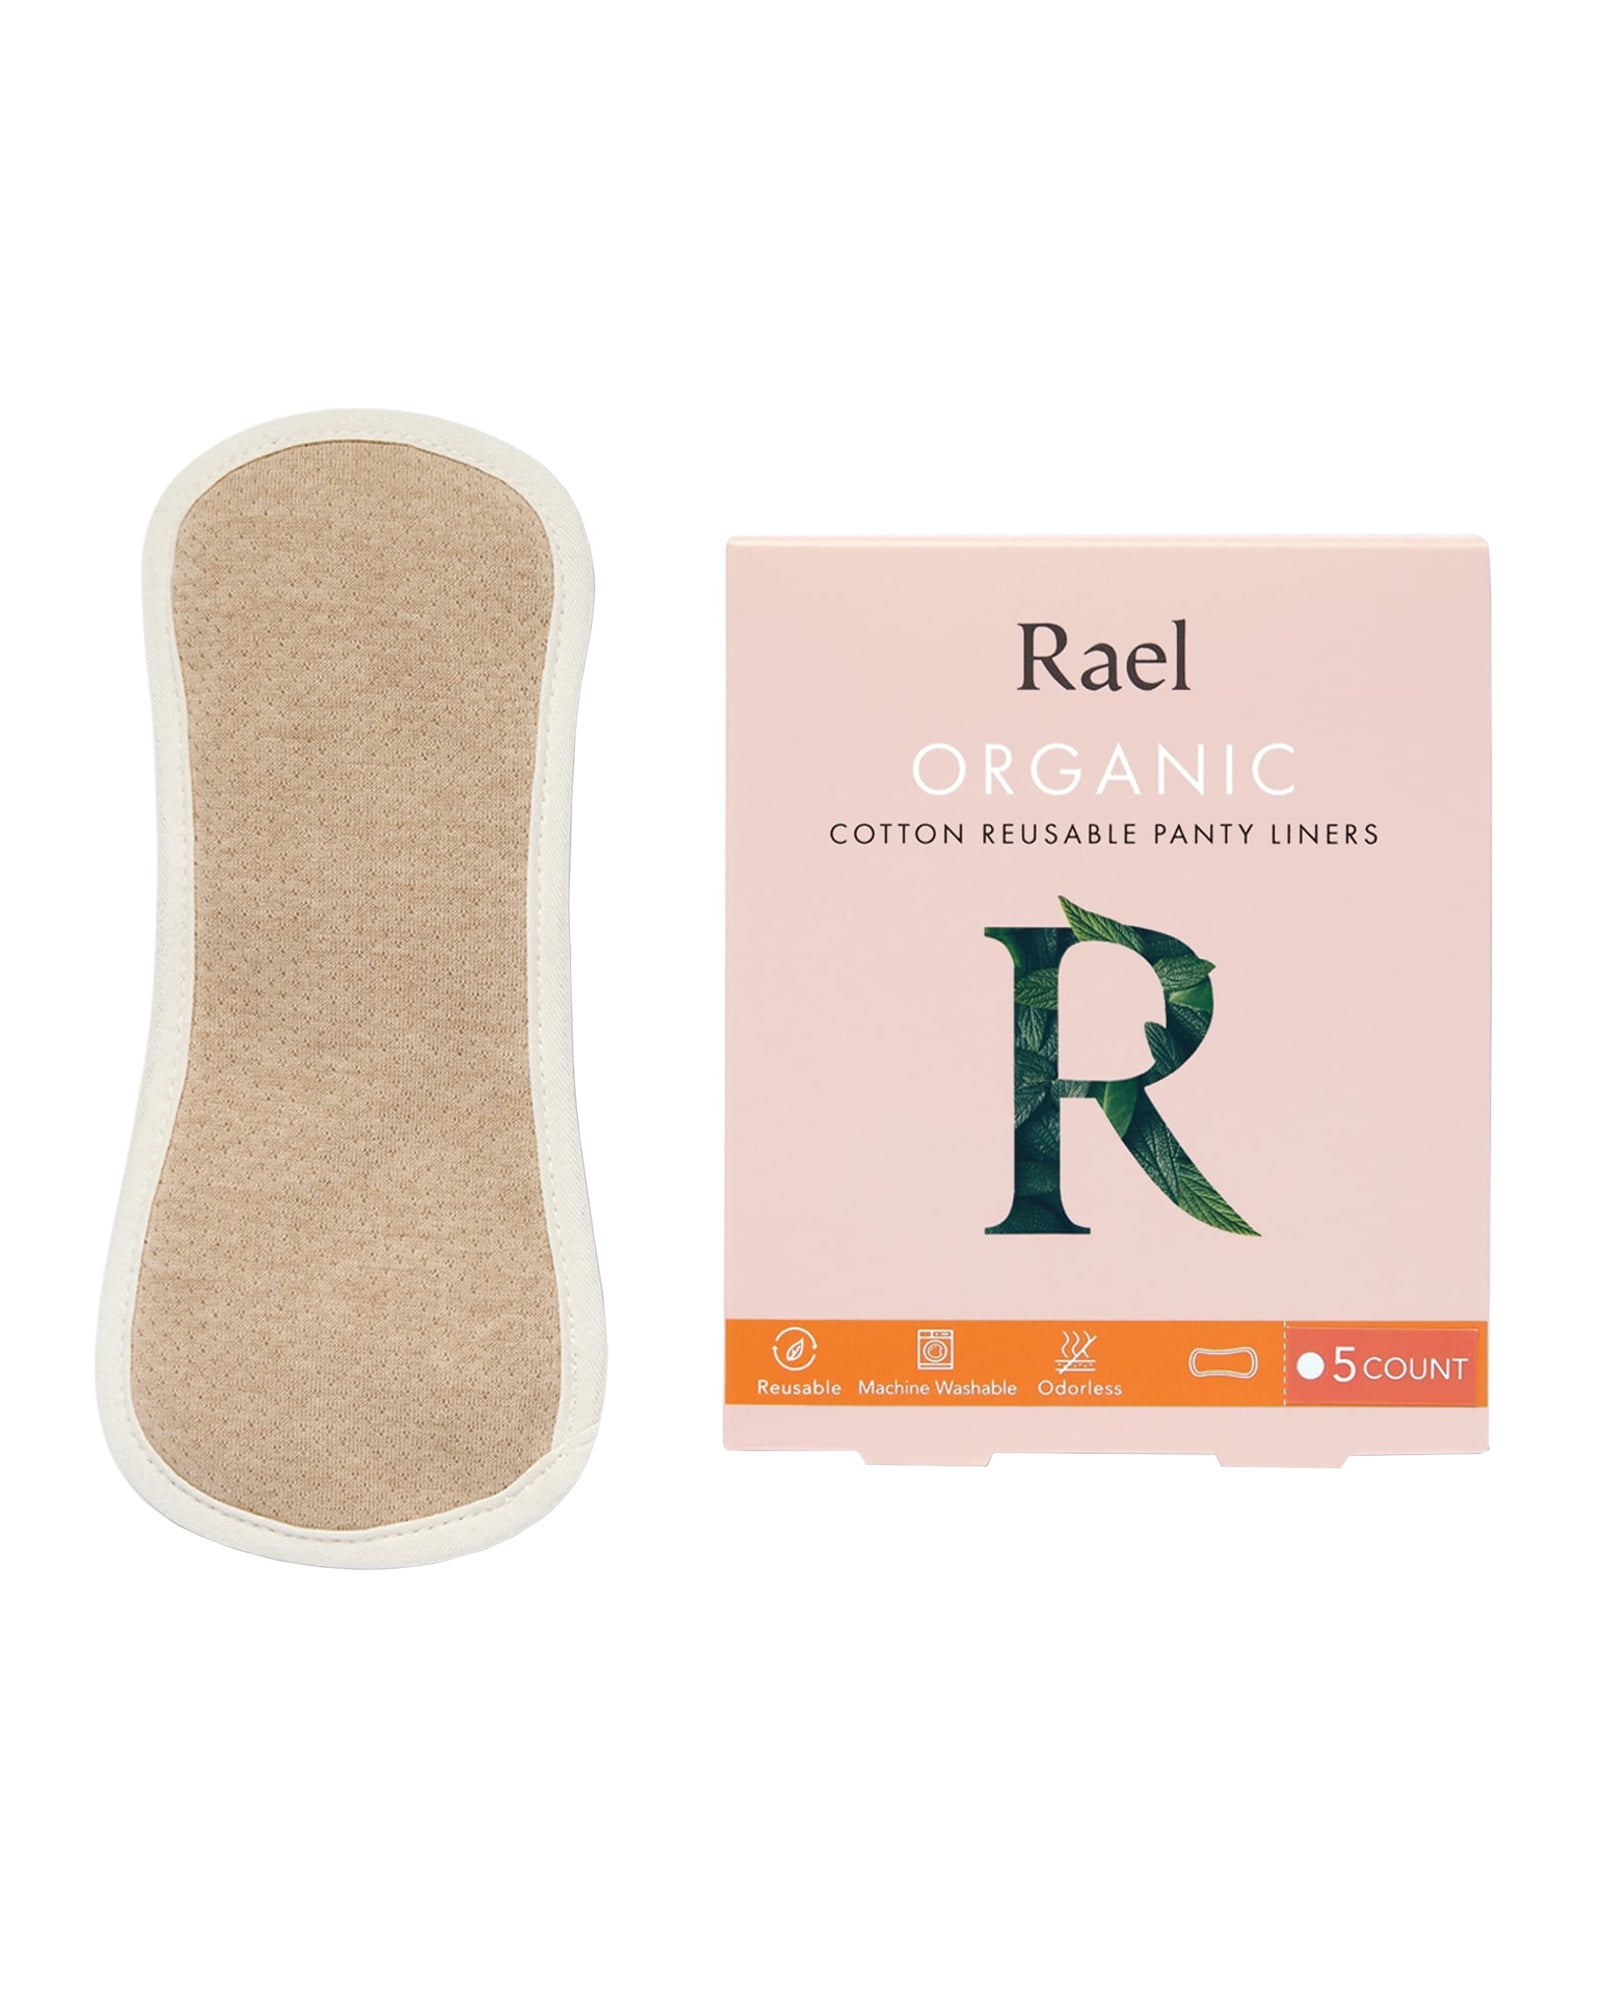 Natural & Organic Panty Liners - Chemical & Toxin Free